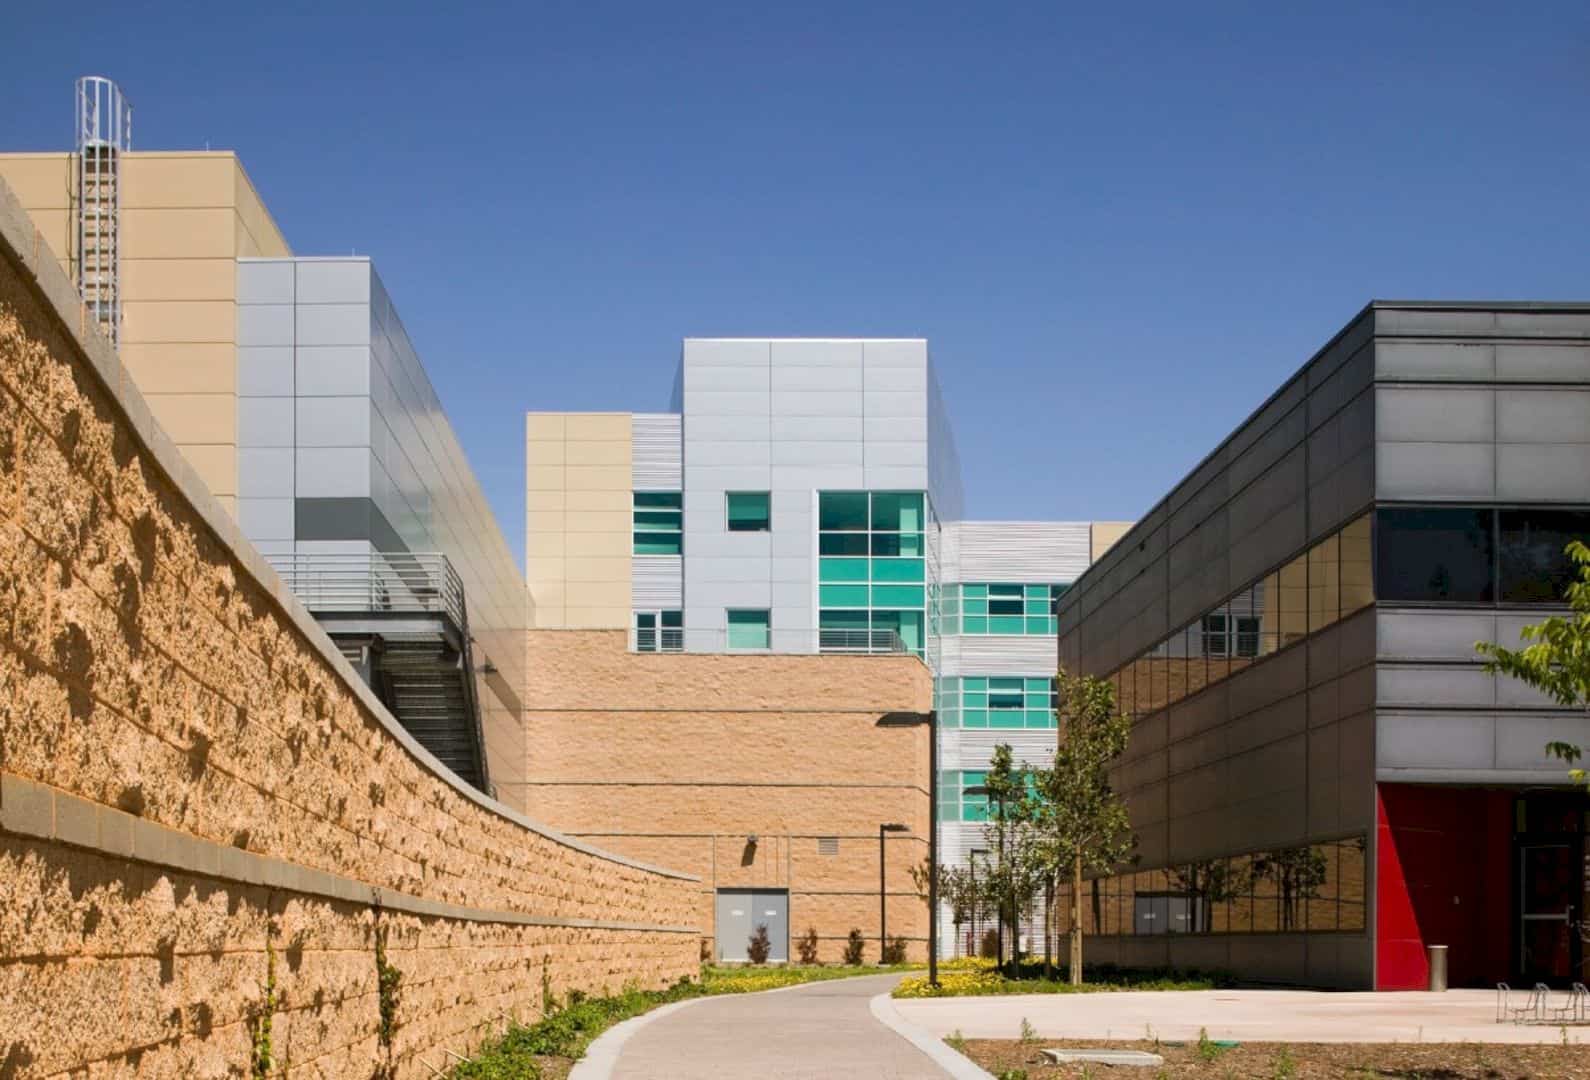 Teraslace Simulation Facility An Leed Gold Certified Research Building Applying Flexible And Sustainable Design 5